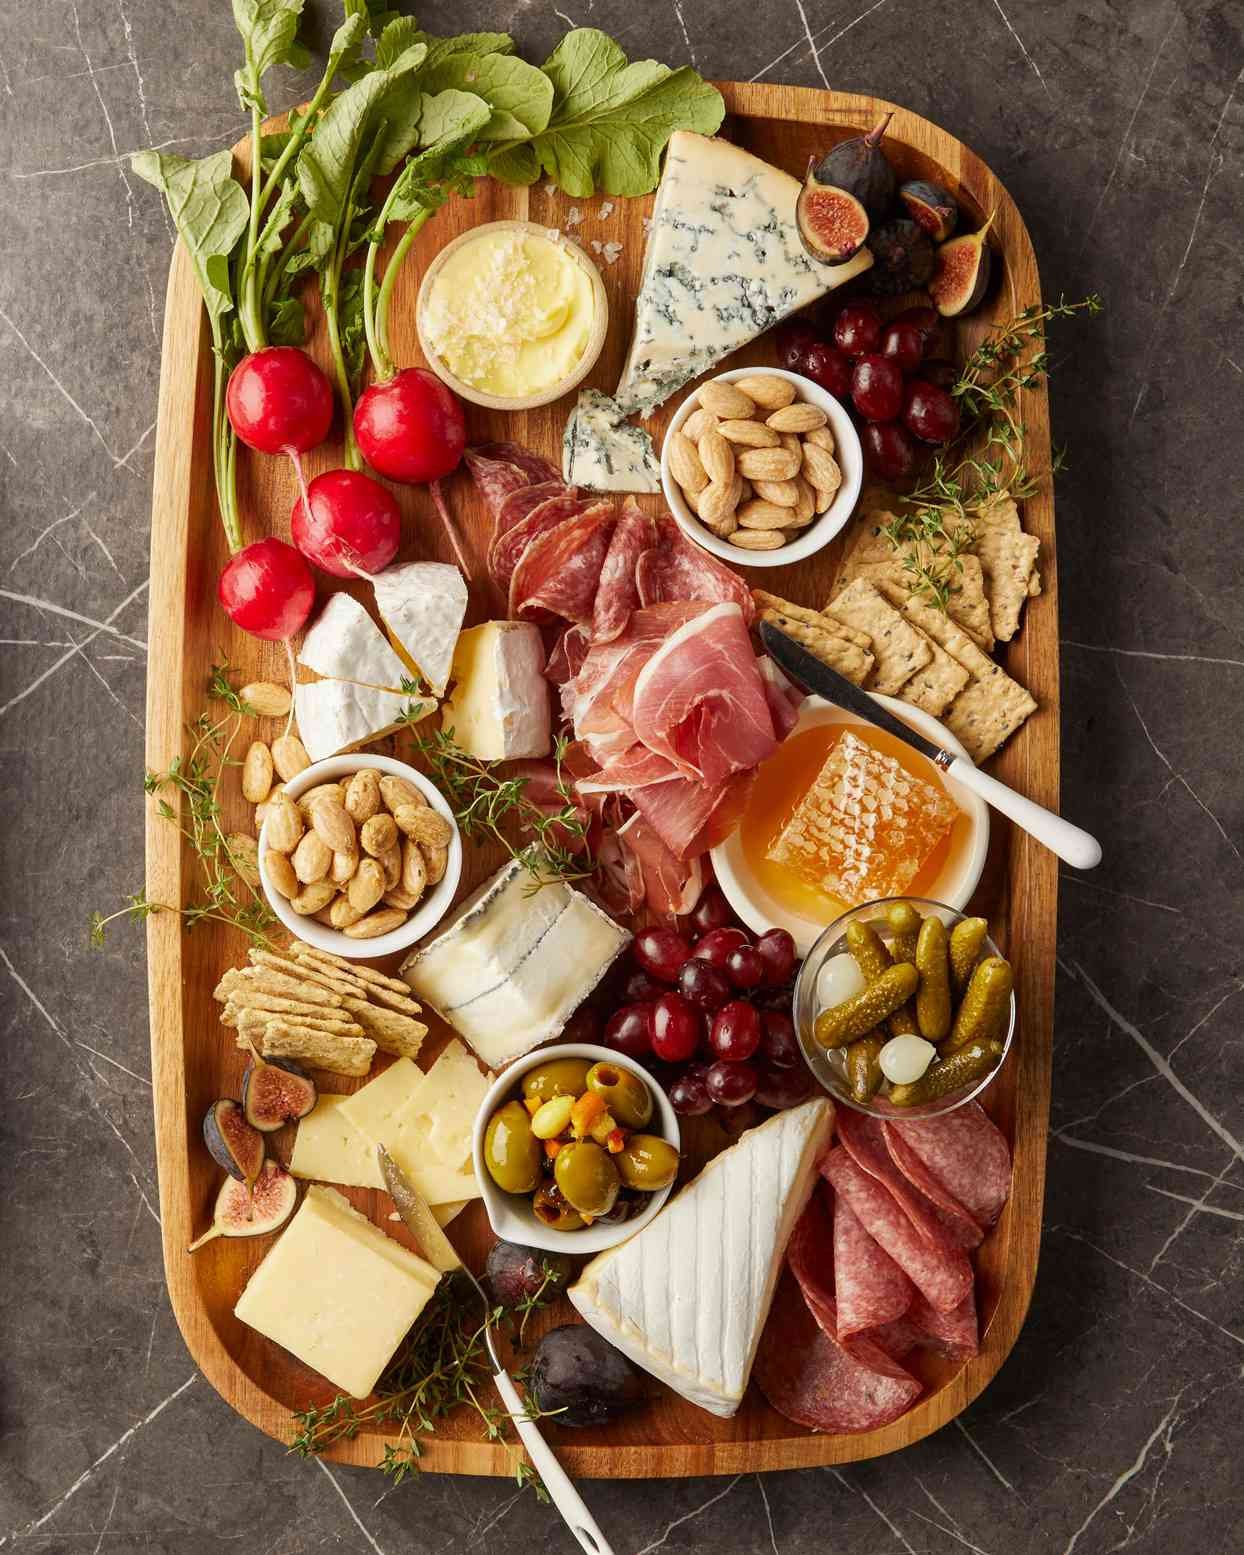 Use Our Party Food Calculator to Plan the Perfect Appetizer Menu